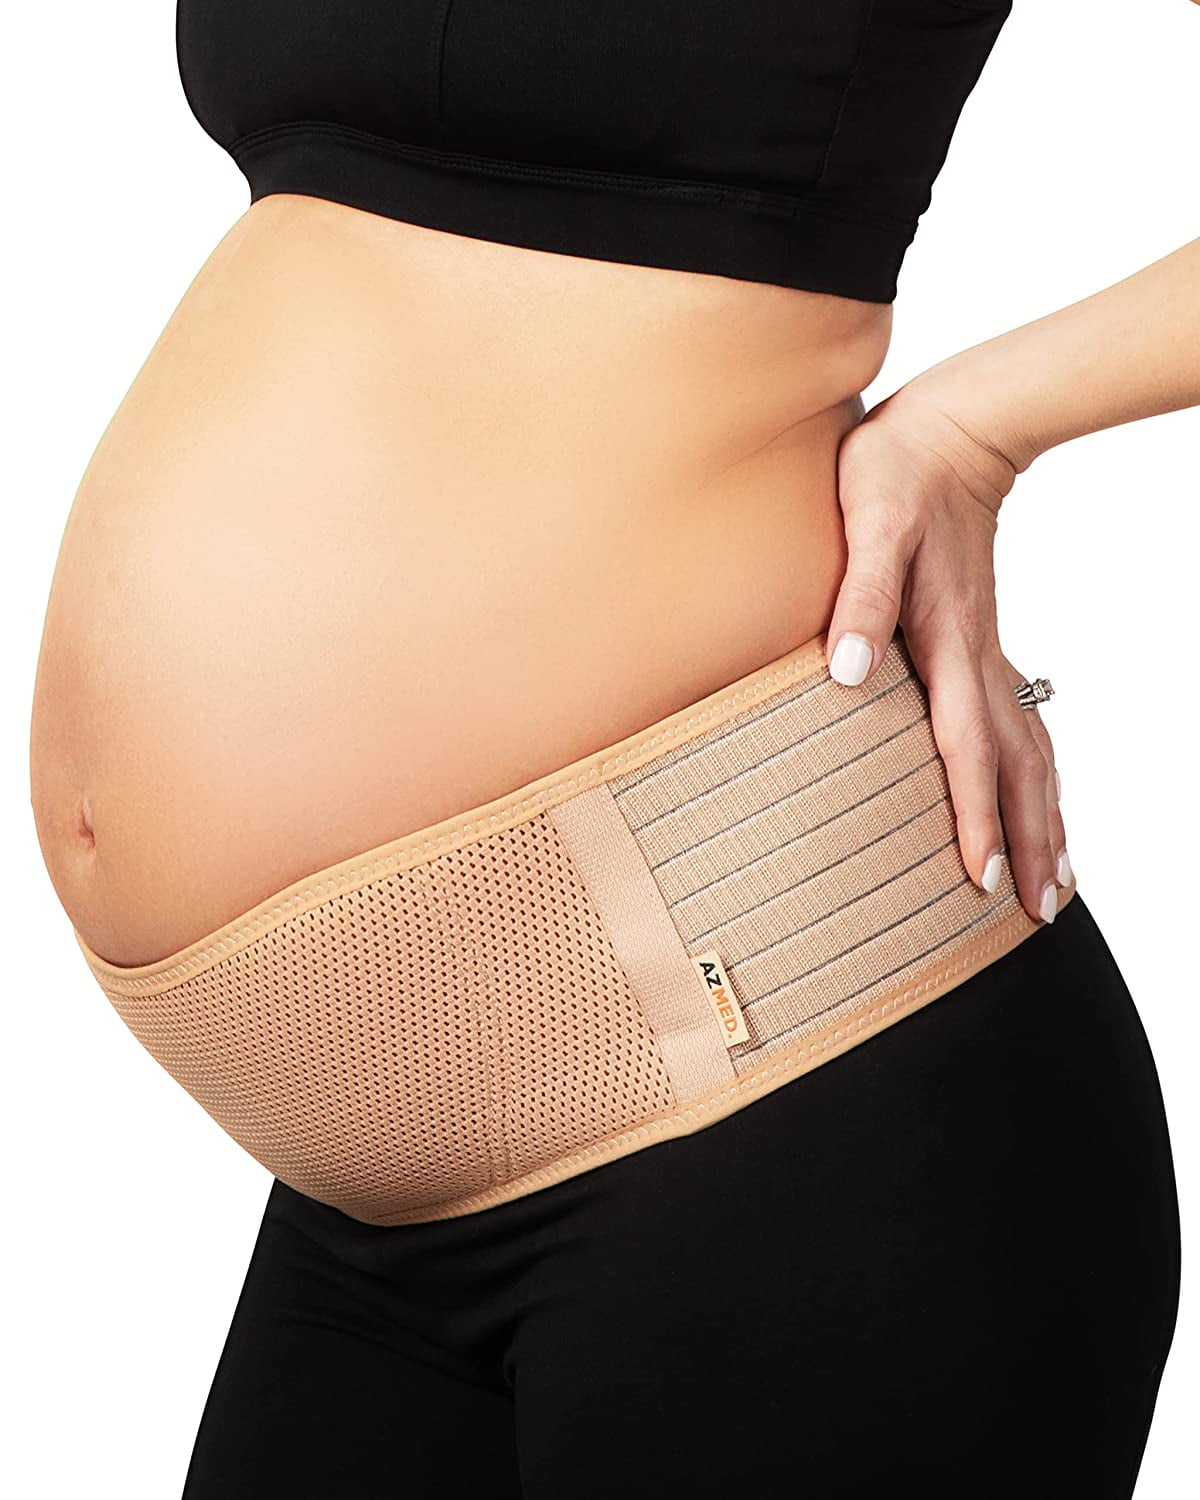 Azmed Maternity Belly Band for Pregnant Women | Pregnancy Belly Support  Band for Abdomen, Pelvic, Waist, & Back Pain | Adjustable Maternity Belt |  For